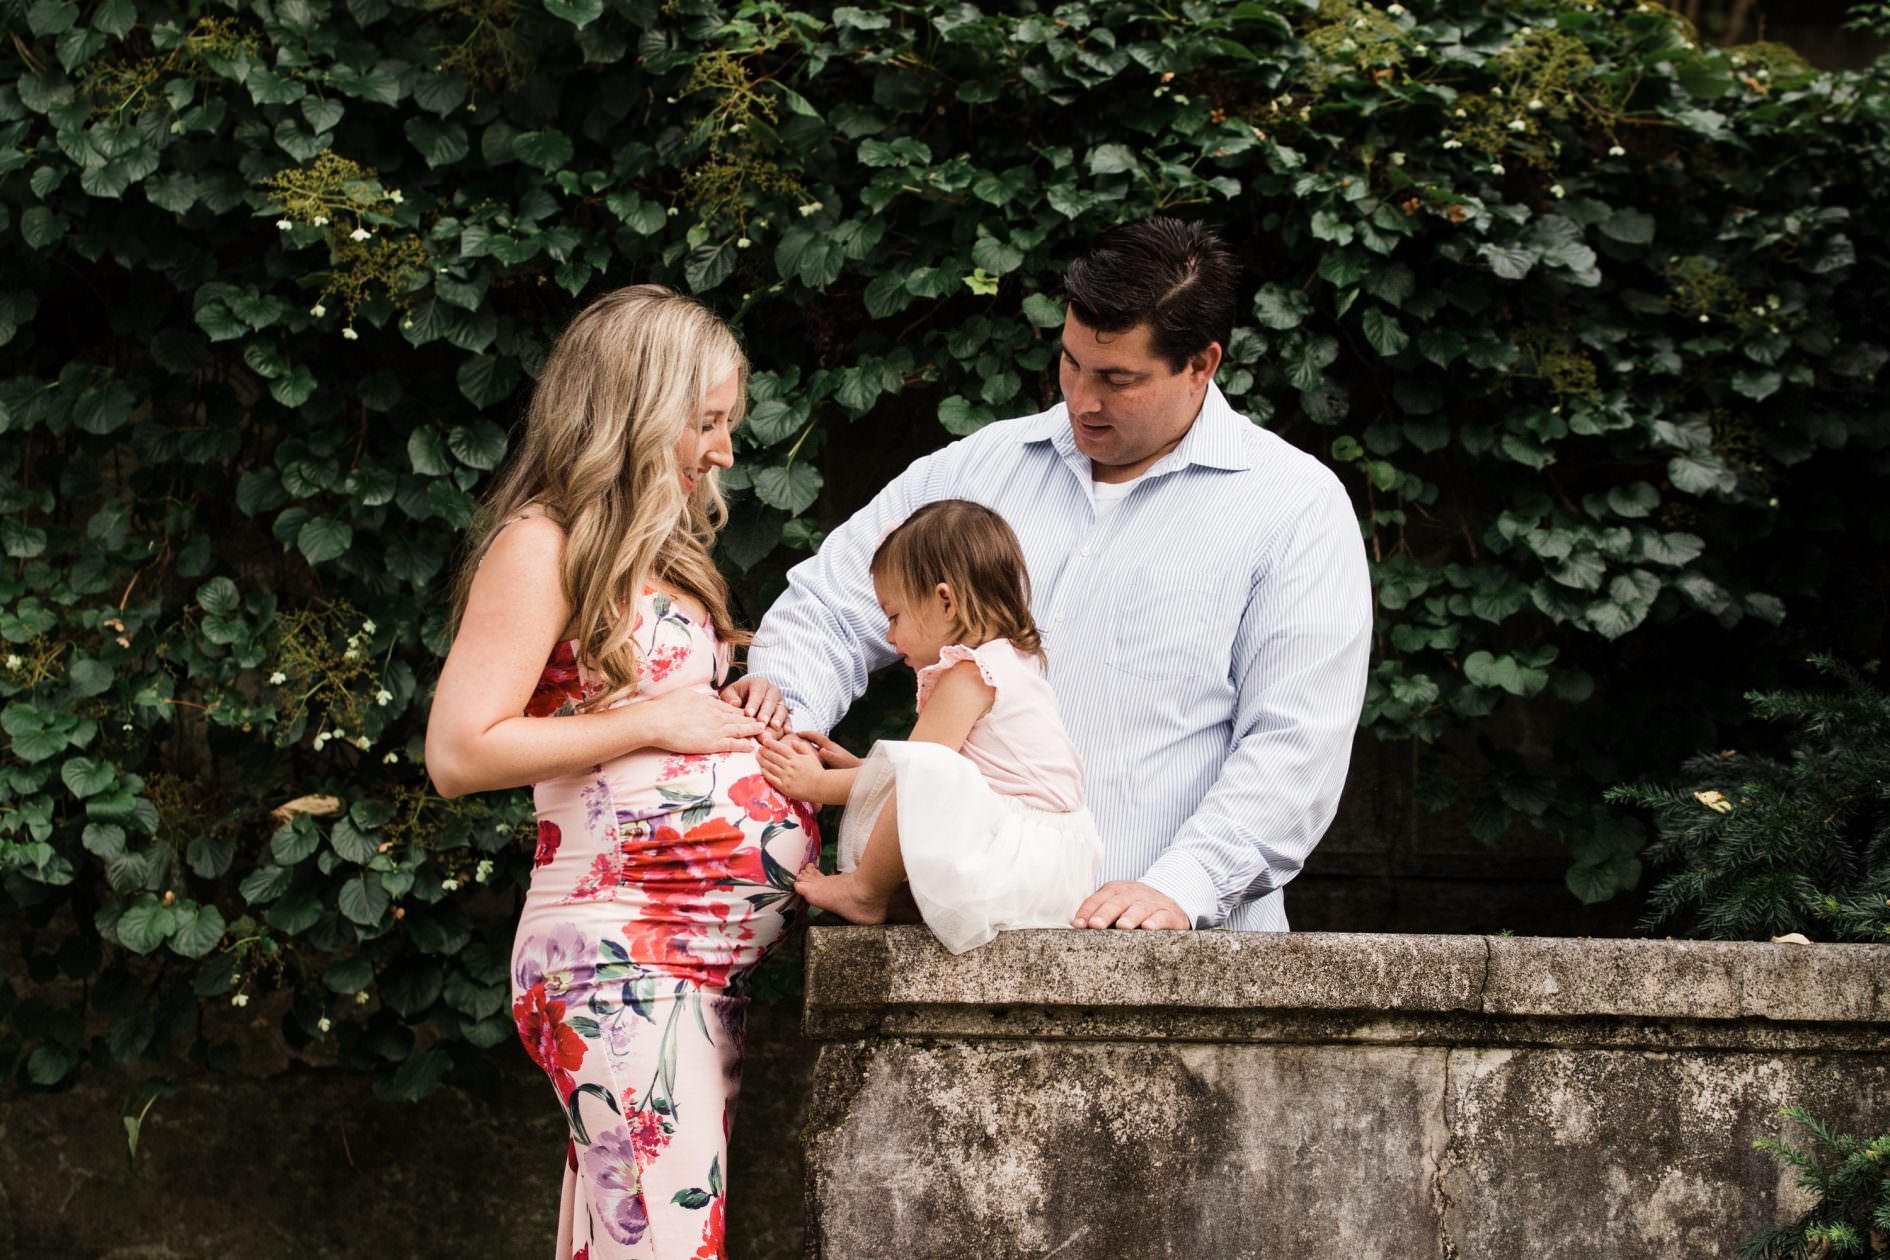 PITTSBURGH FAMILY AND NEWBORN PHOTOGRAPHY